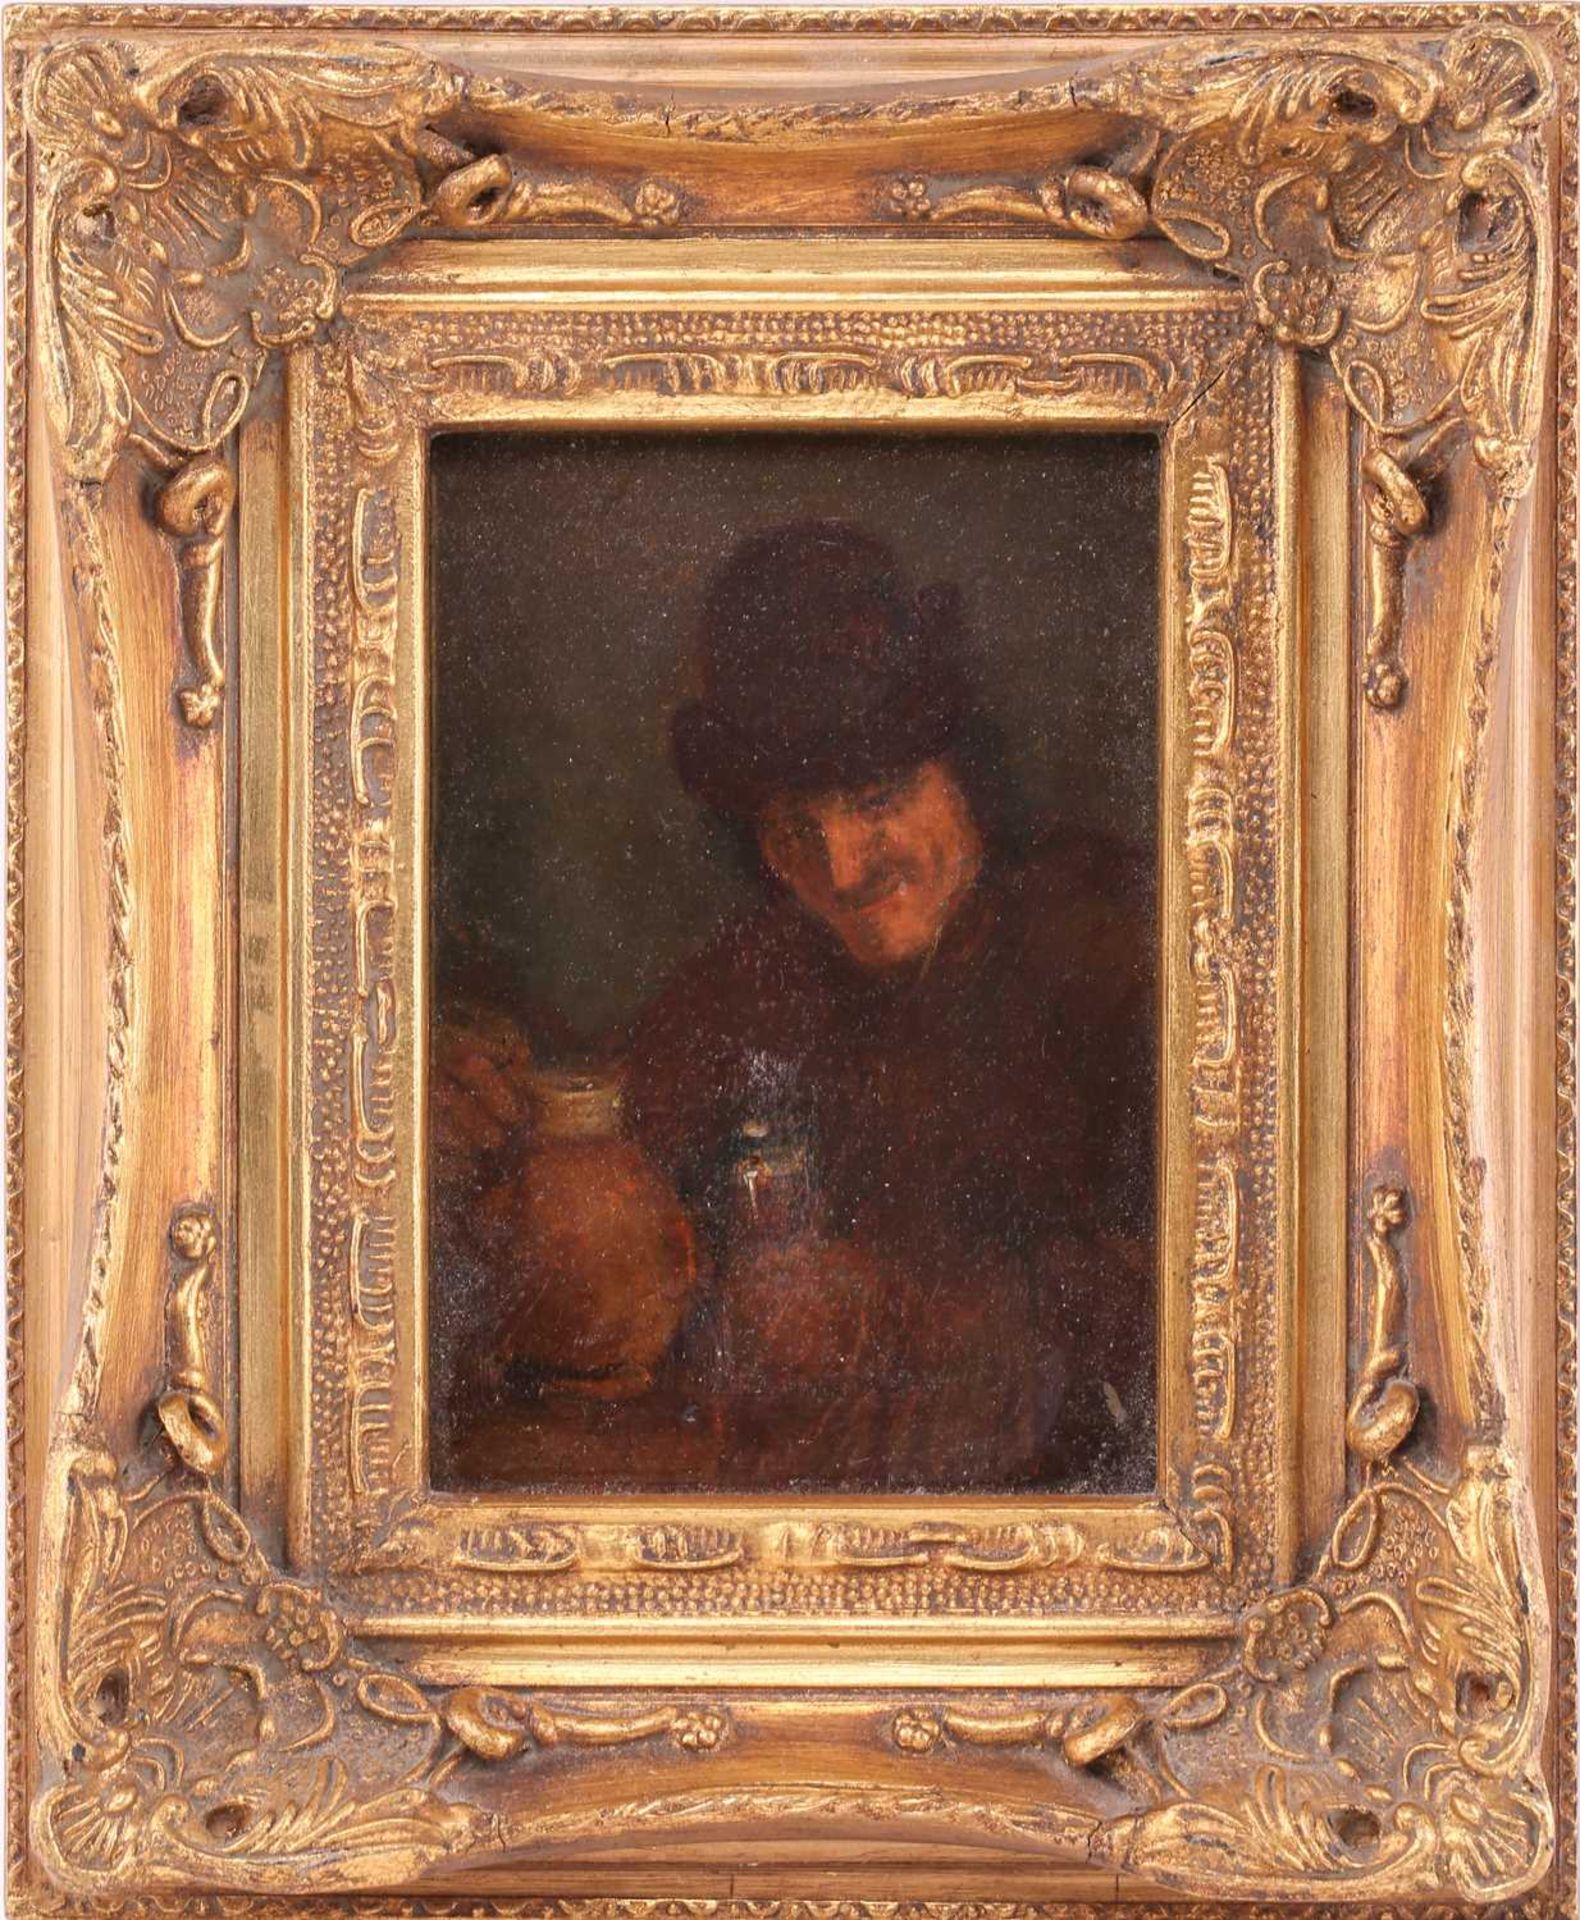 19th century continental school, a Flemish peasant regaling, oil on oak panel, ink inscribed label - Image 2 of 8